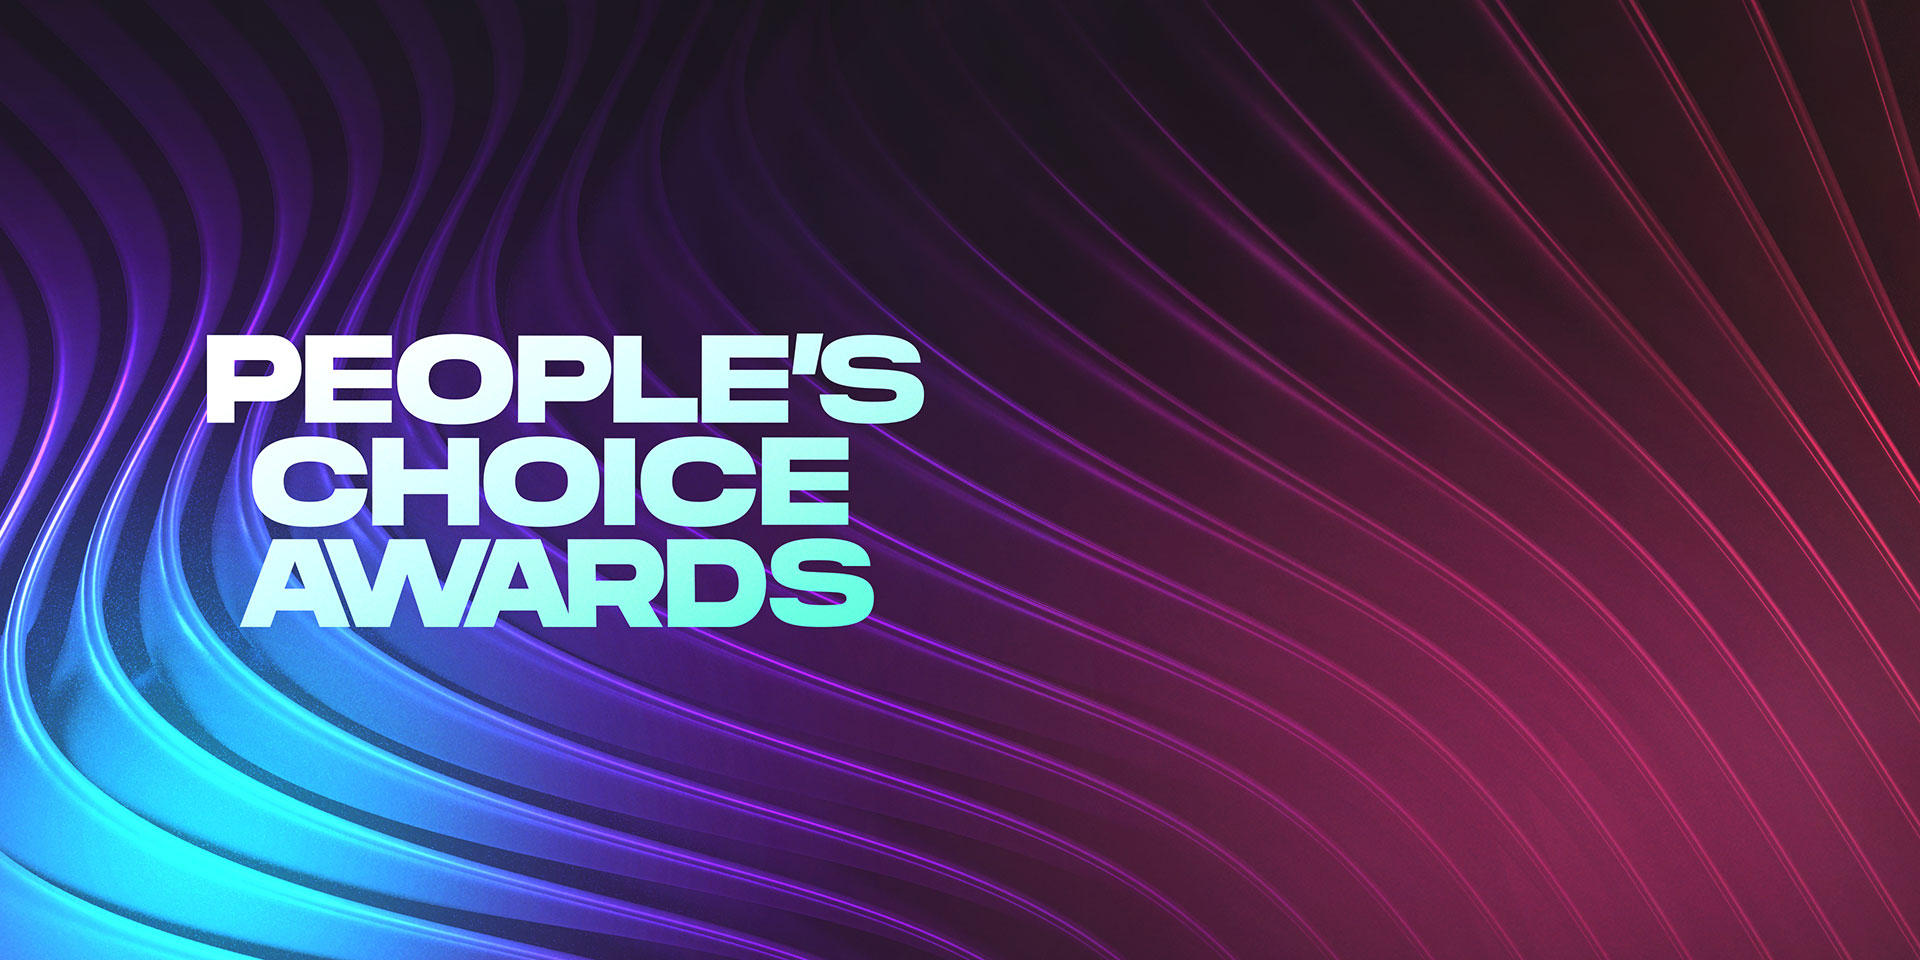 The Game Awards 2021: Here's the Complete List of Winners